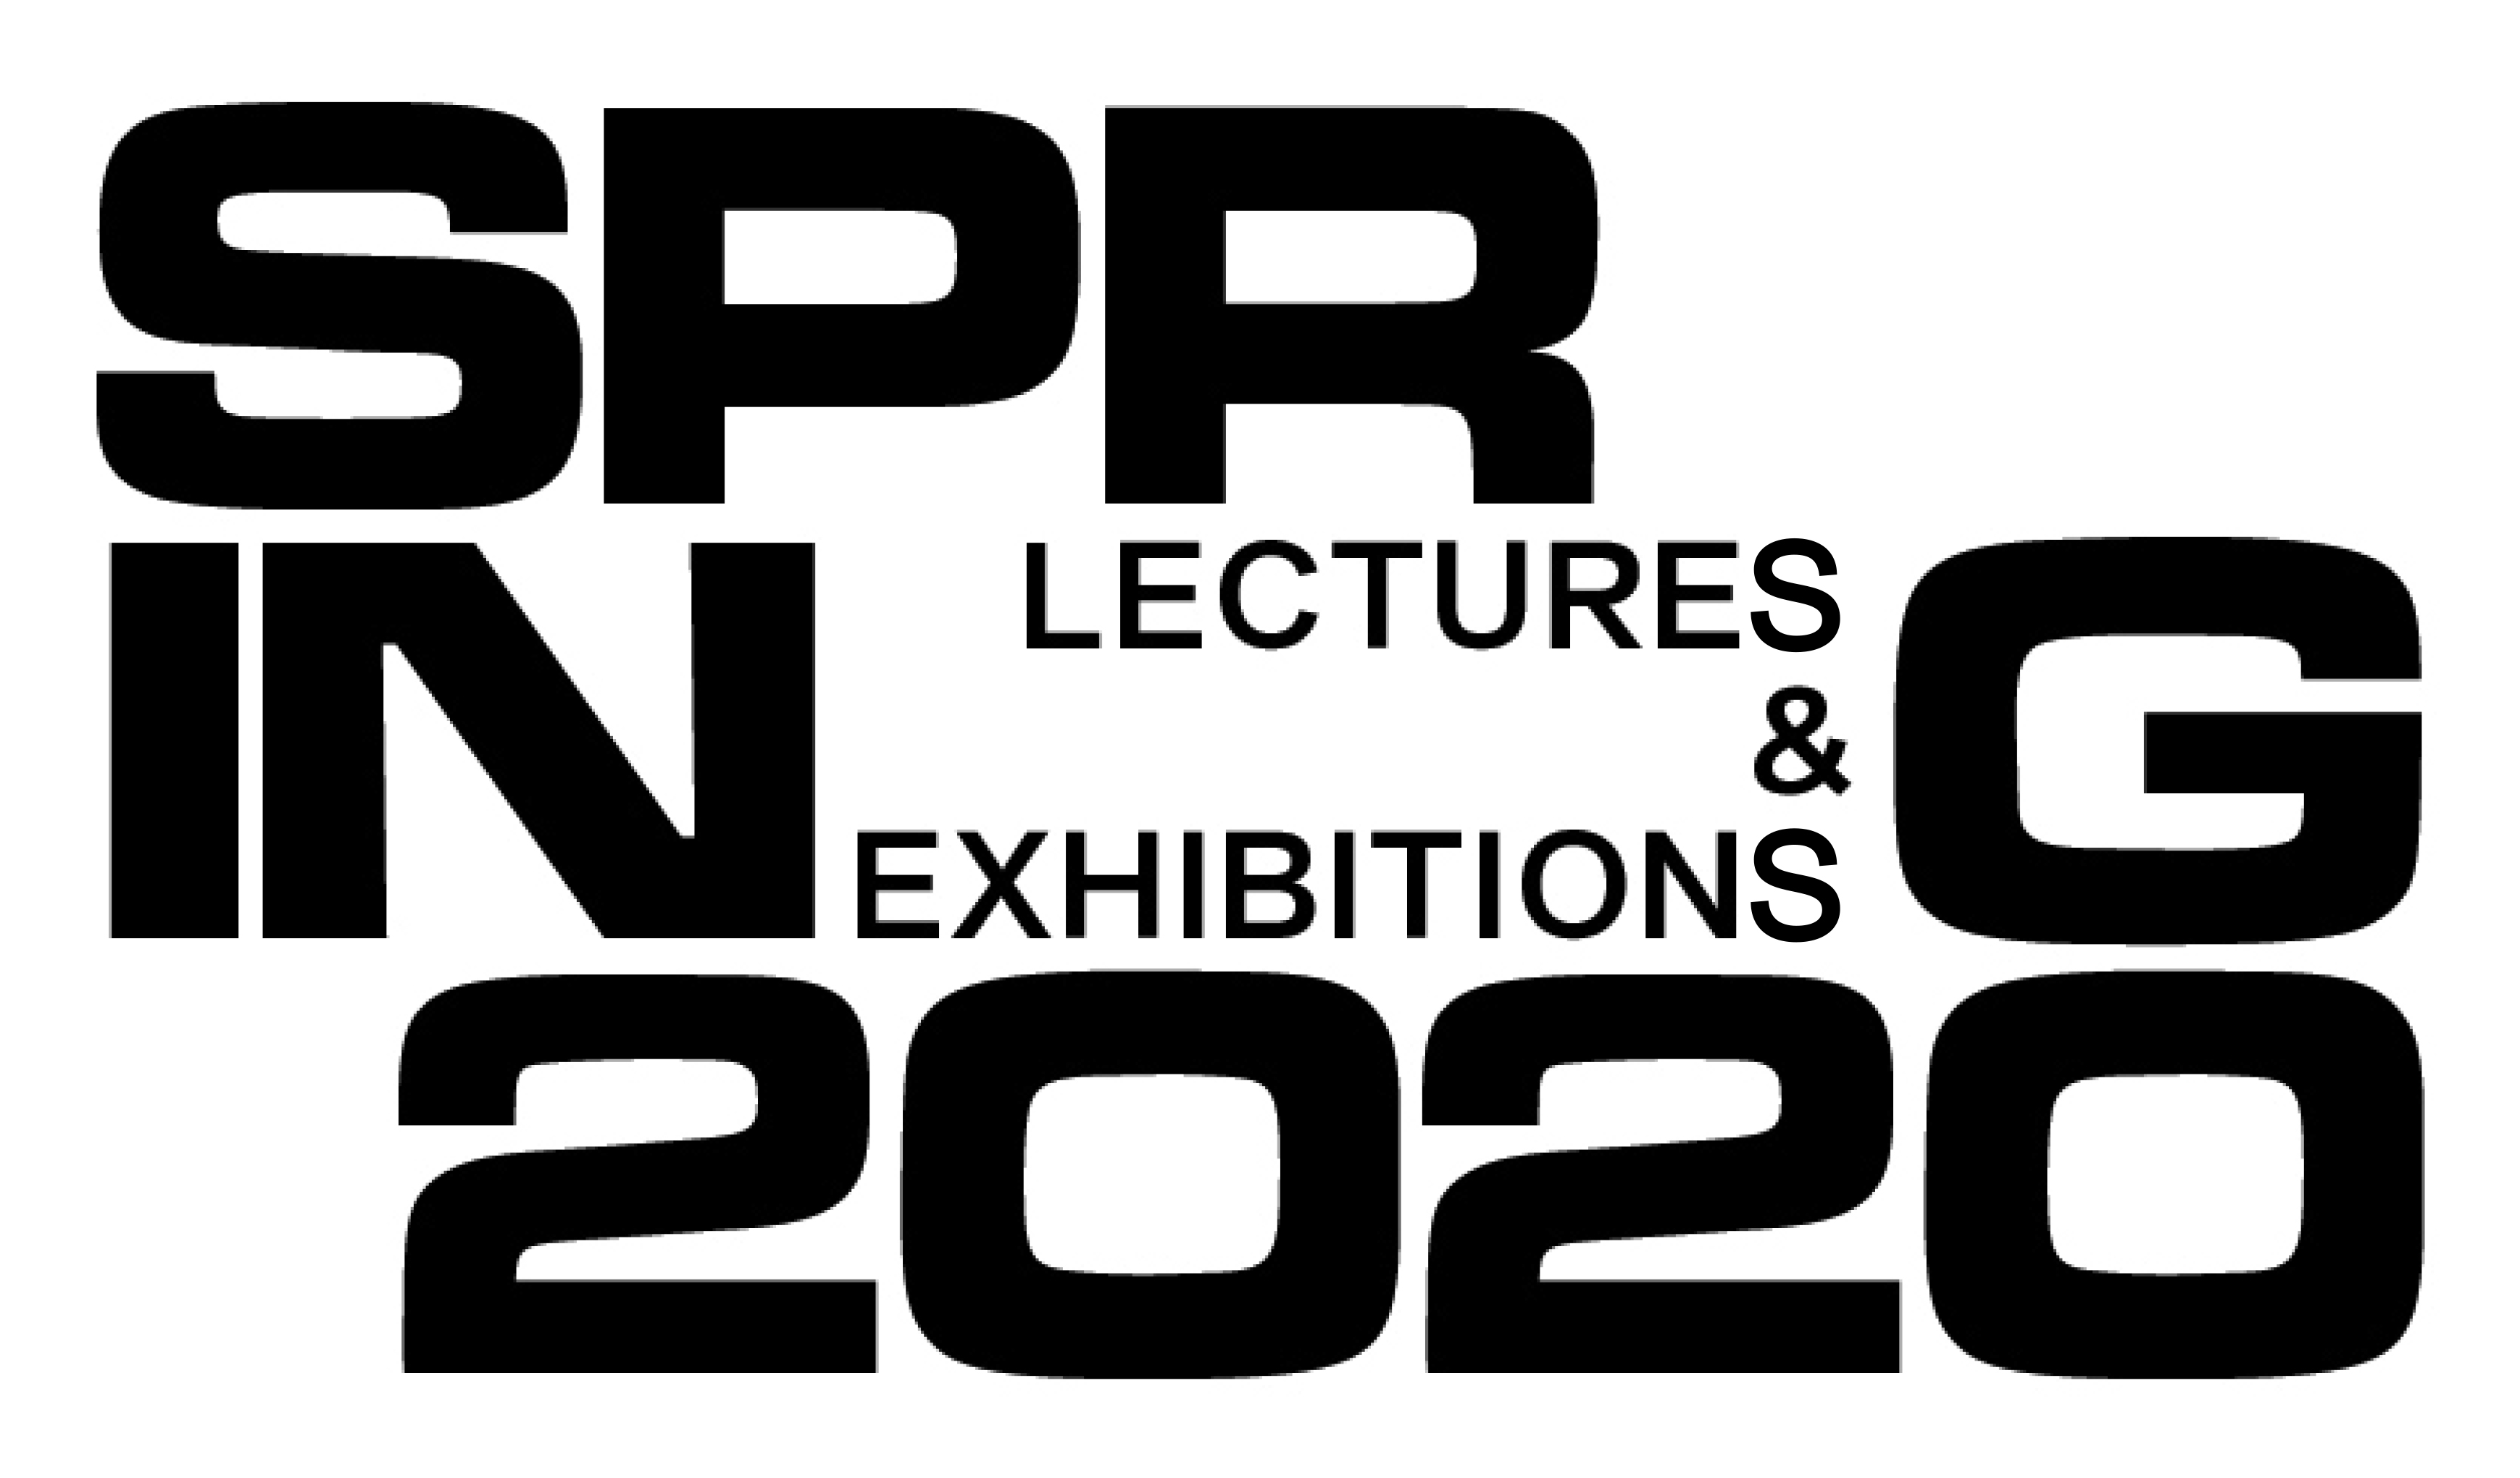 Spring 2020 Lectures & Exhibitions